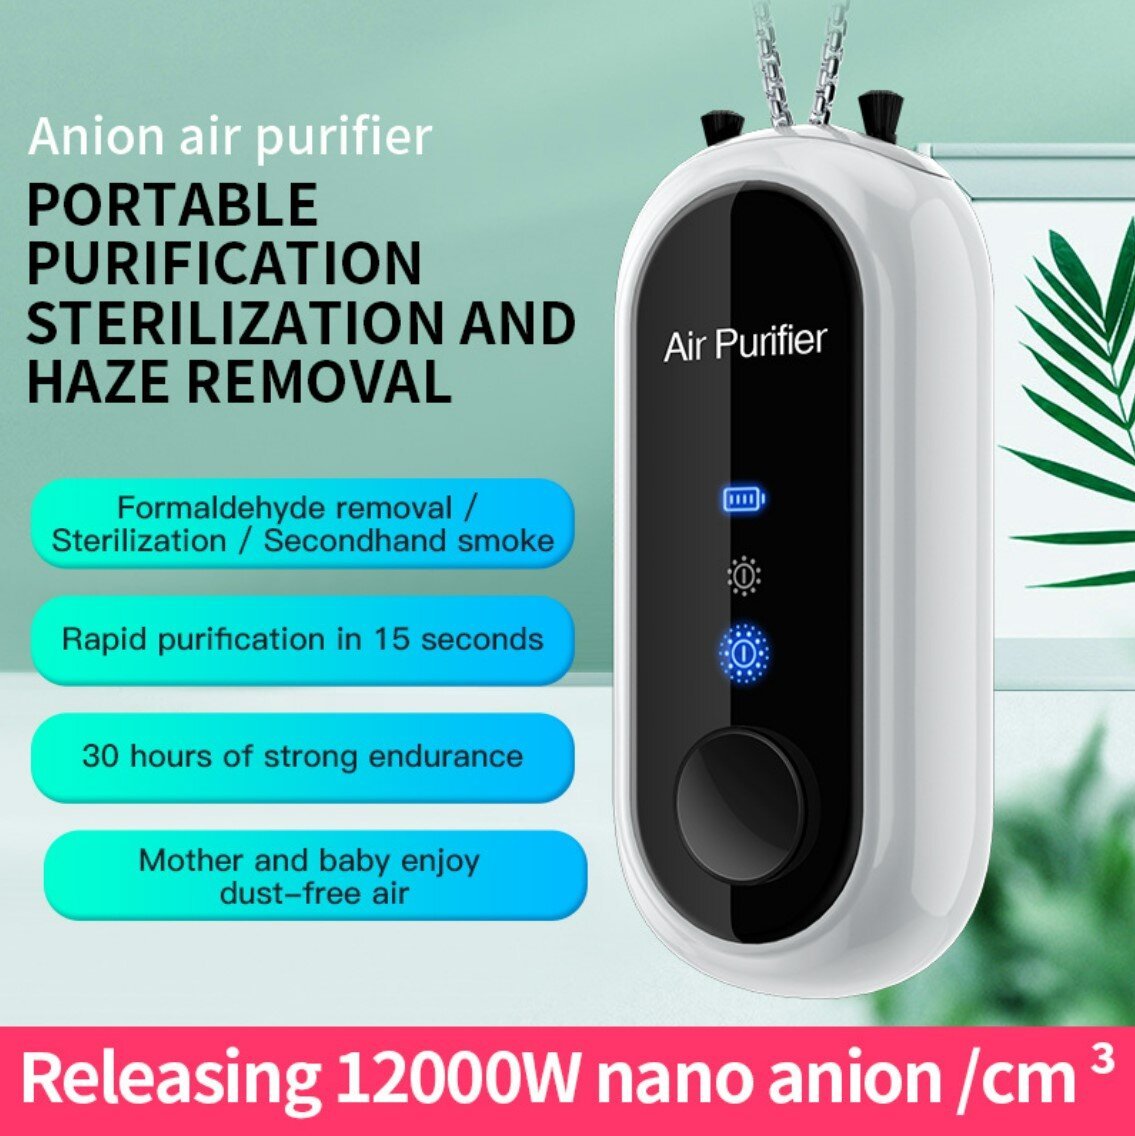 Neck-mounted negative ion air freshener releases 120 million negative ions/removes haze PM2.5 harmful substances - white portable air freshener